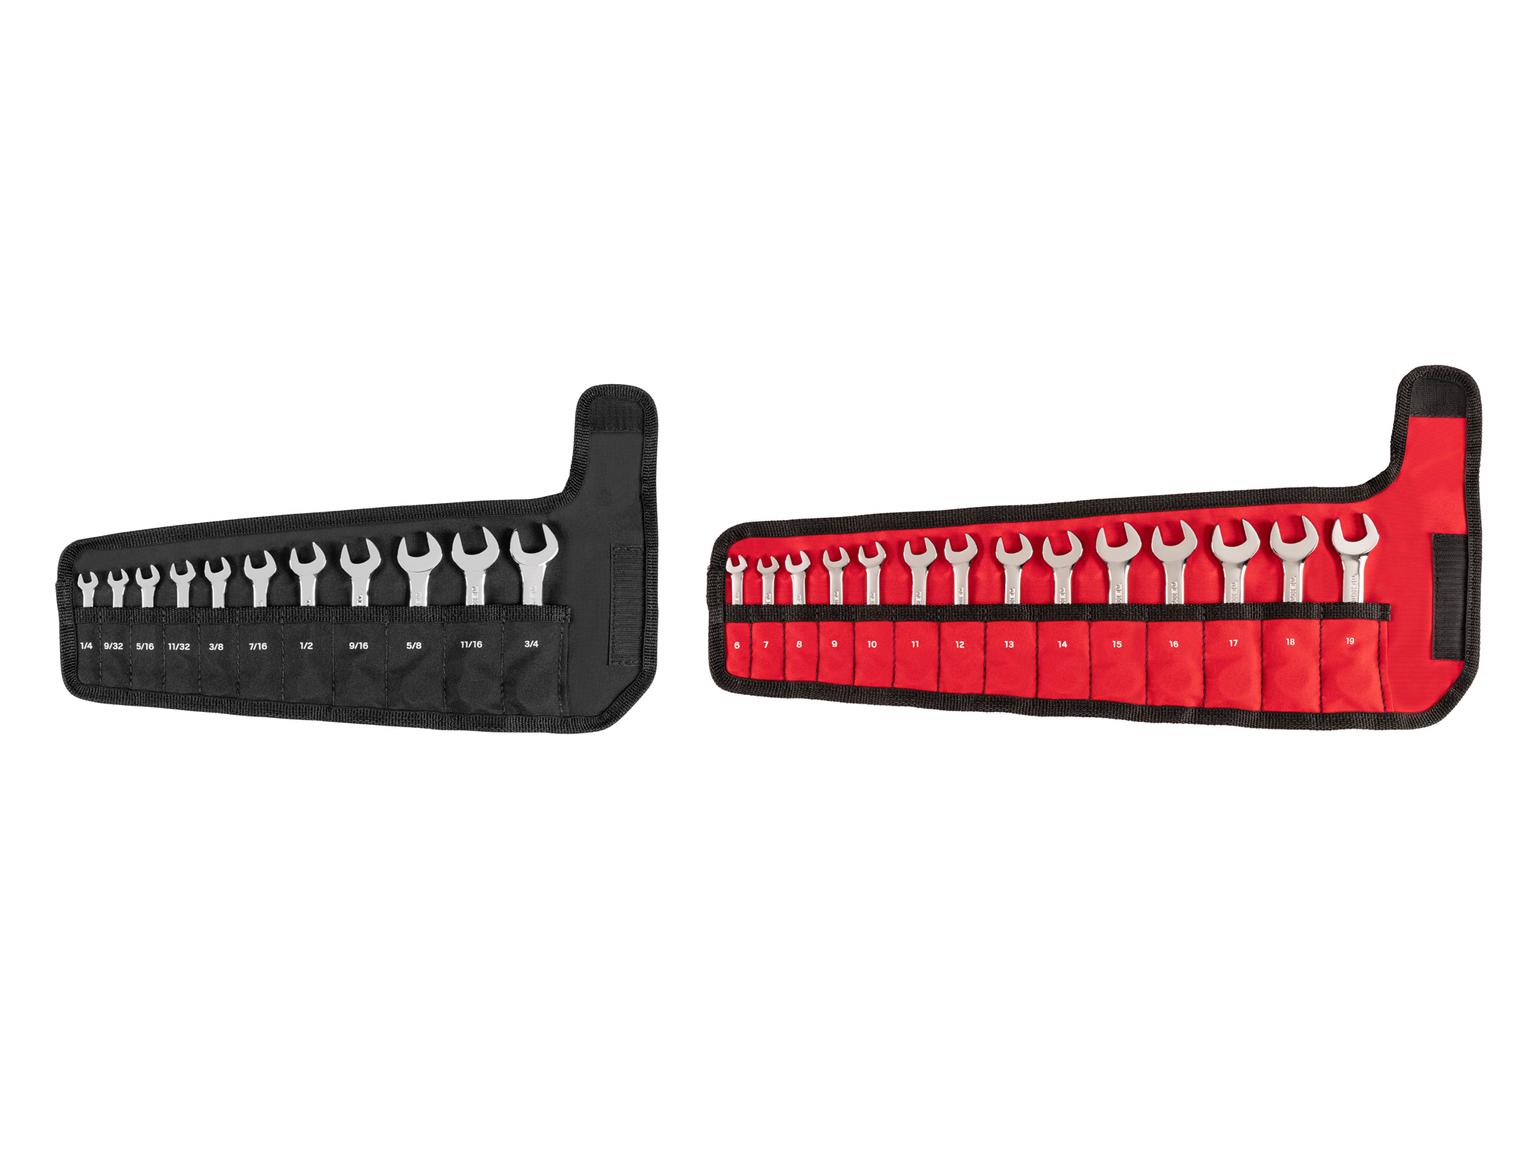 TEKTON WCB94403-T Stubby Combination Wrench Set with Pouch, 25-Piece (1/4 - 3/4 in., 6 - 19 mm)